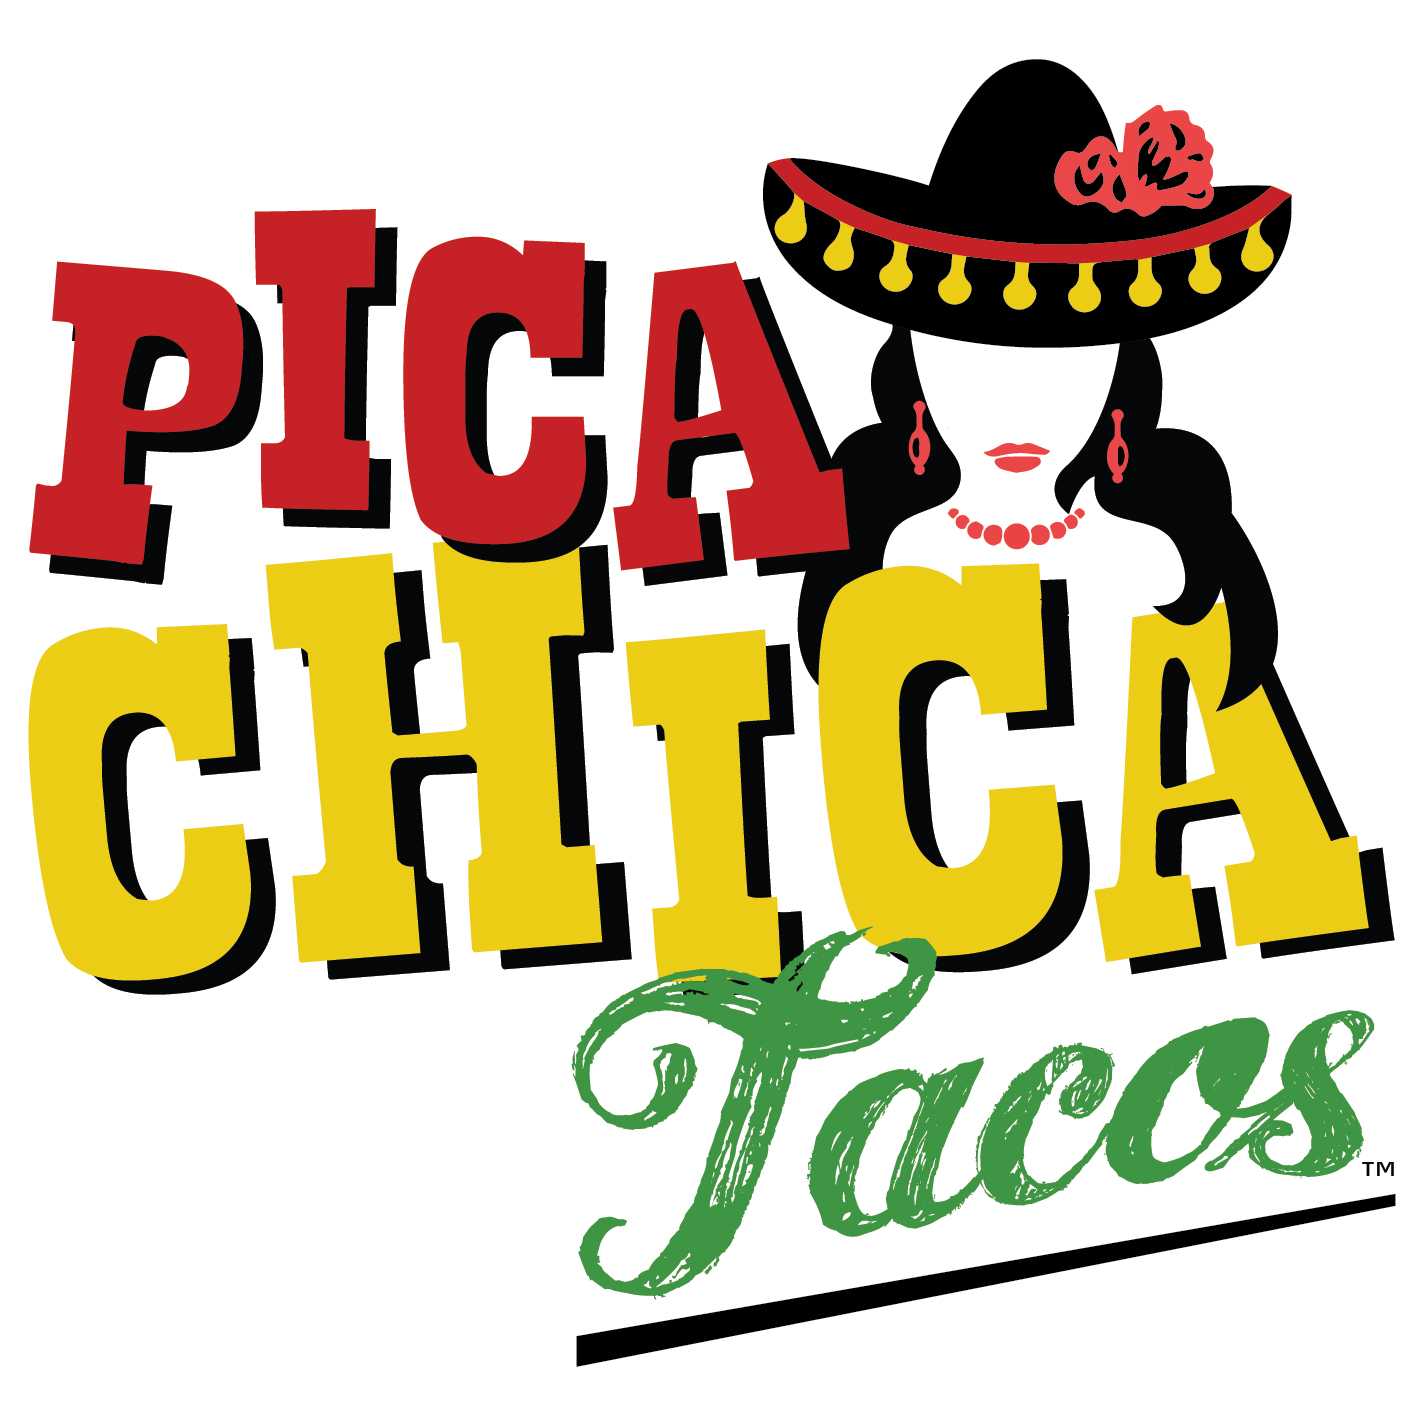 Pica Chica - Order Online - Delivery - Clinton